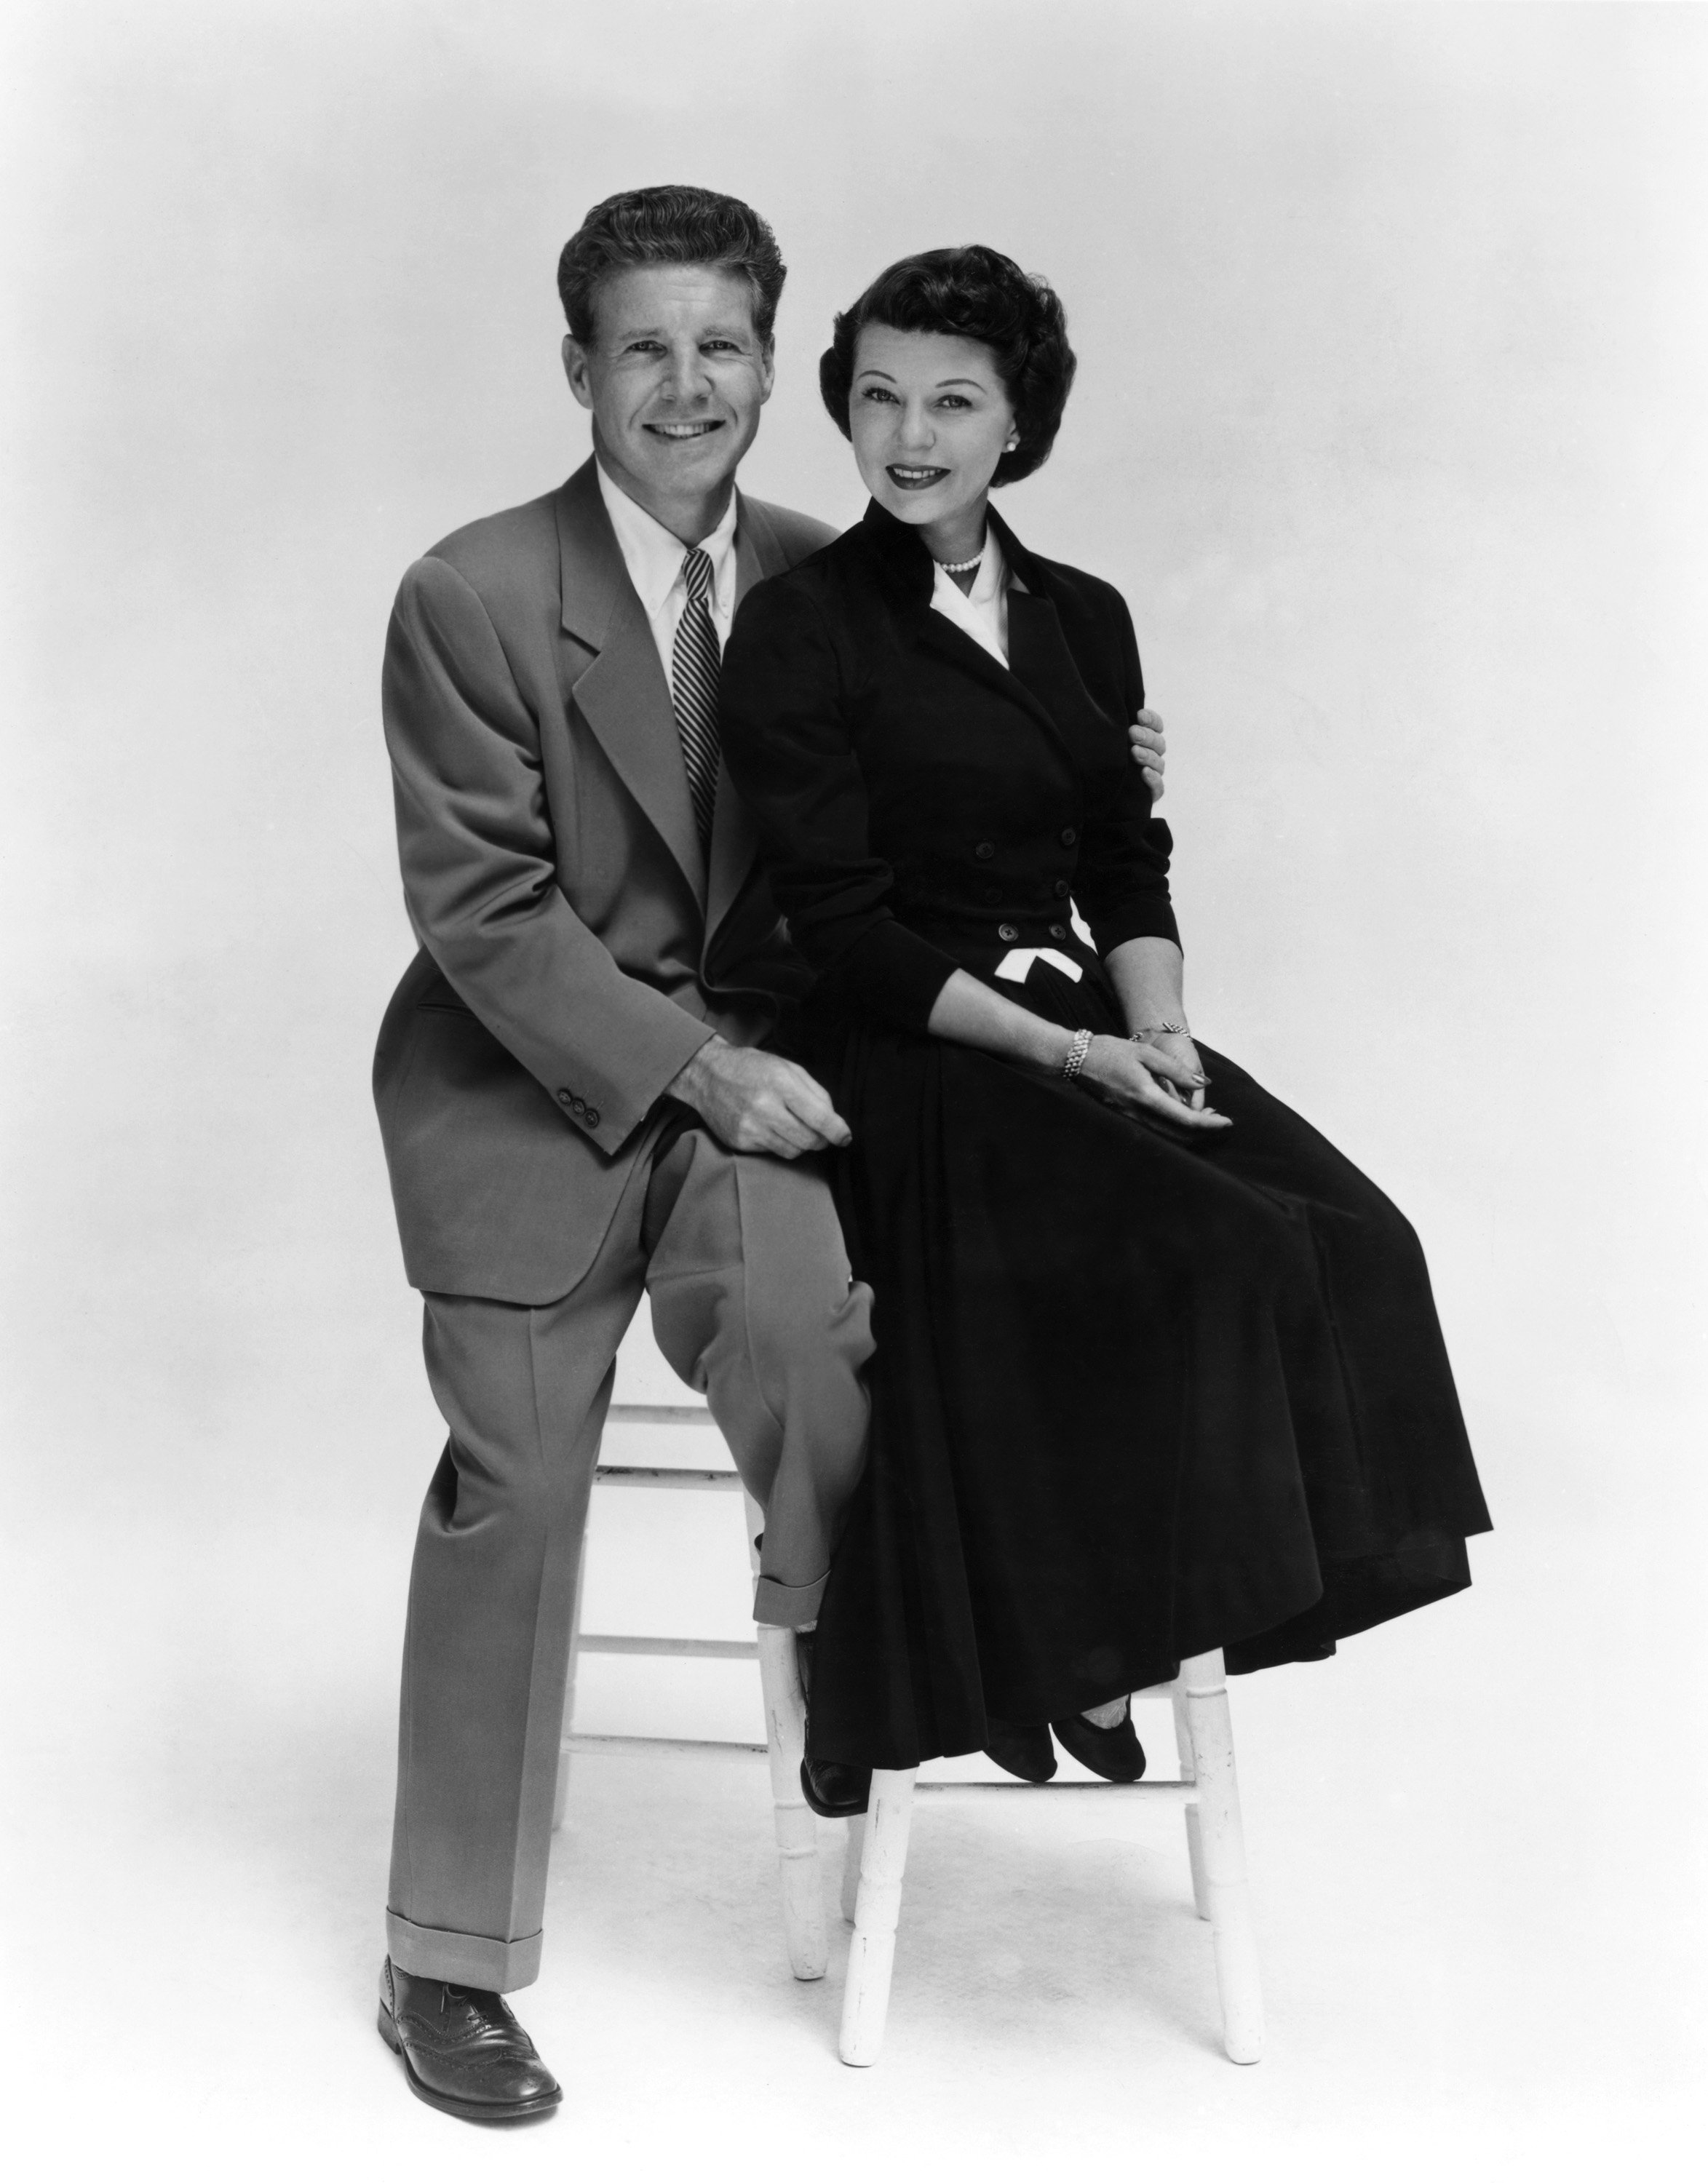 Ozzie Nelson and Harriet Nelson on "The Adventures of Ozzie and Harriet" in an unspecified image. | Source: NBCU Photo Bank/NBCUniversal/Getty Images